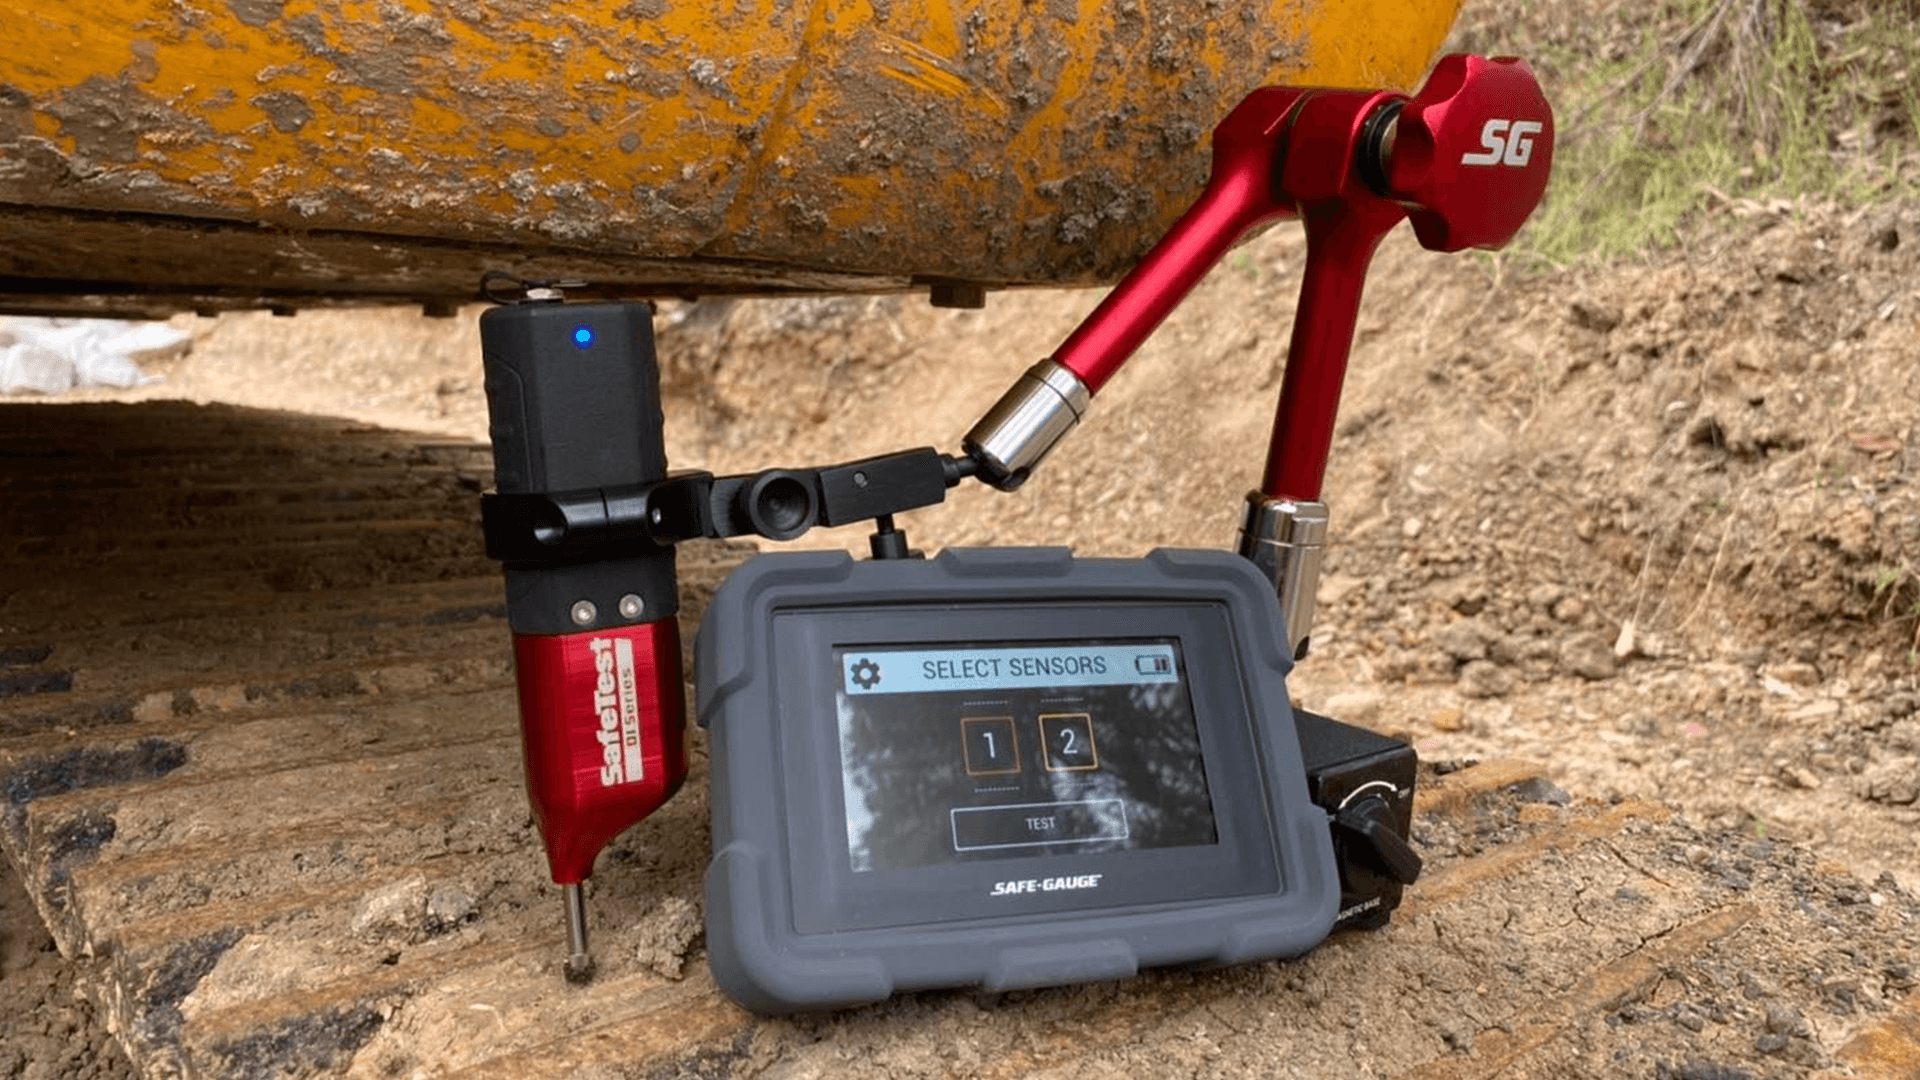 High accuracy, remotely monitored dial indicator for heavy machinery components.